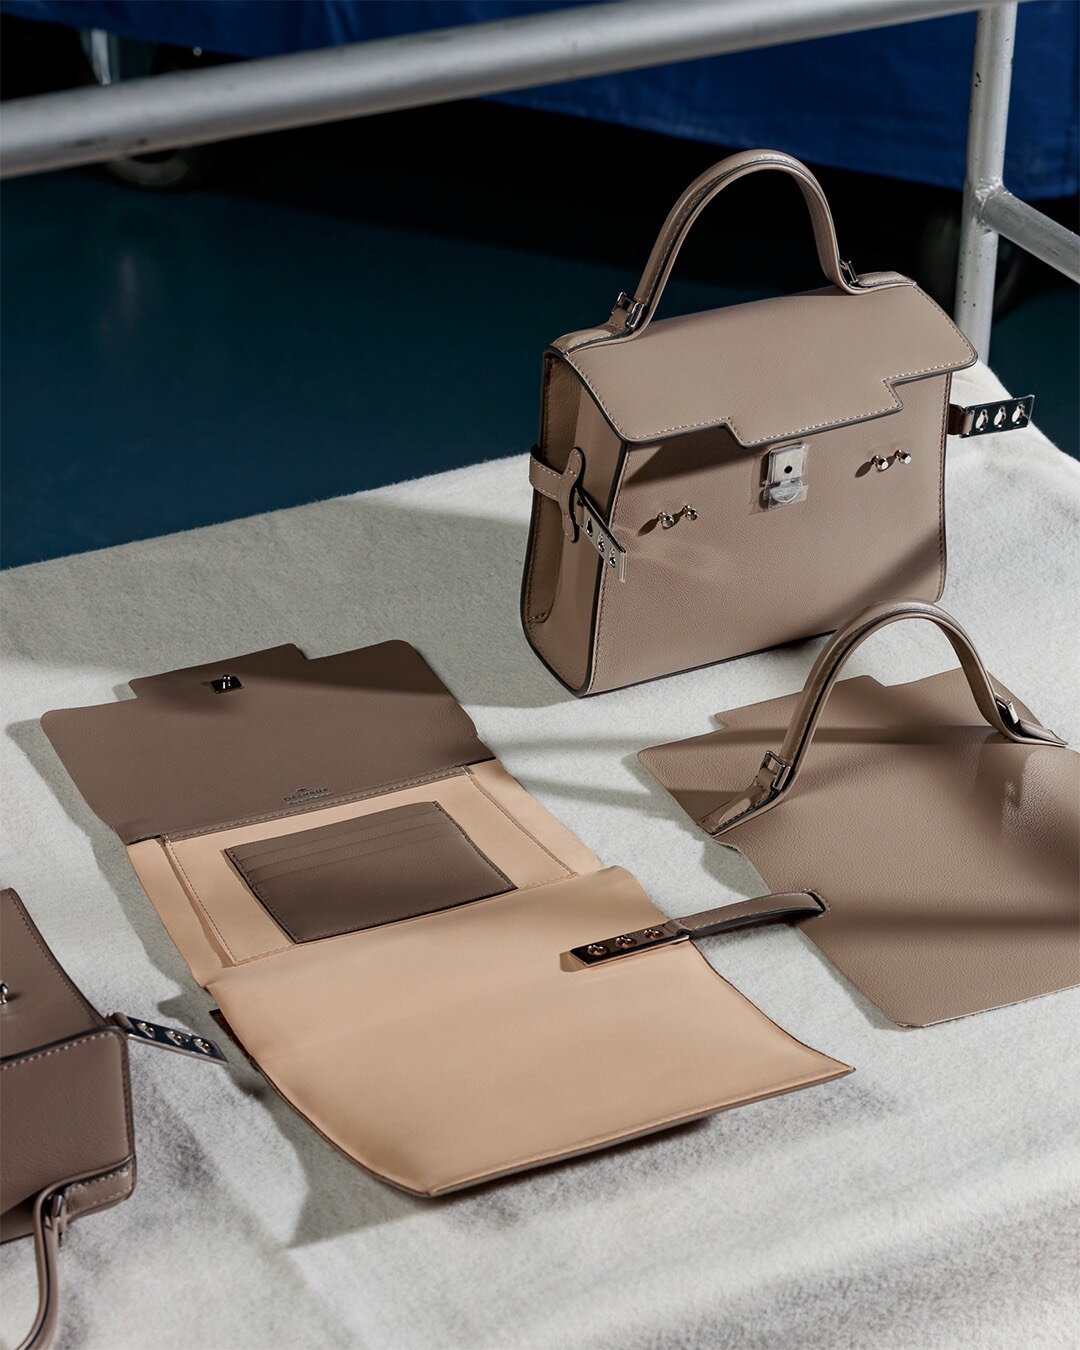 Delvaux - Introducing the #DelvauxPinAiress, a bag which pays tribute to la  Maison's near 200-year-old savoir-faire and signature timeless style,  resonating with contemporary world through a legacy that is always in  motion.